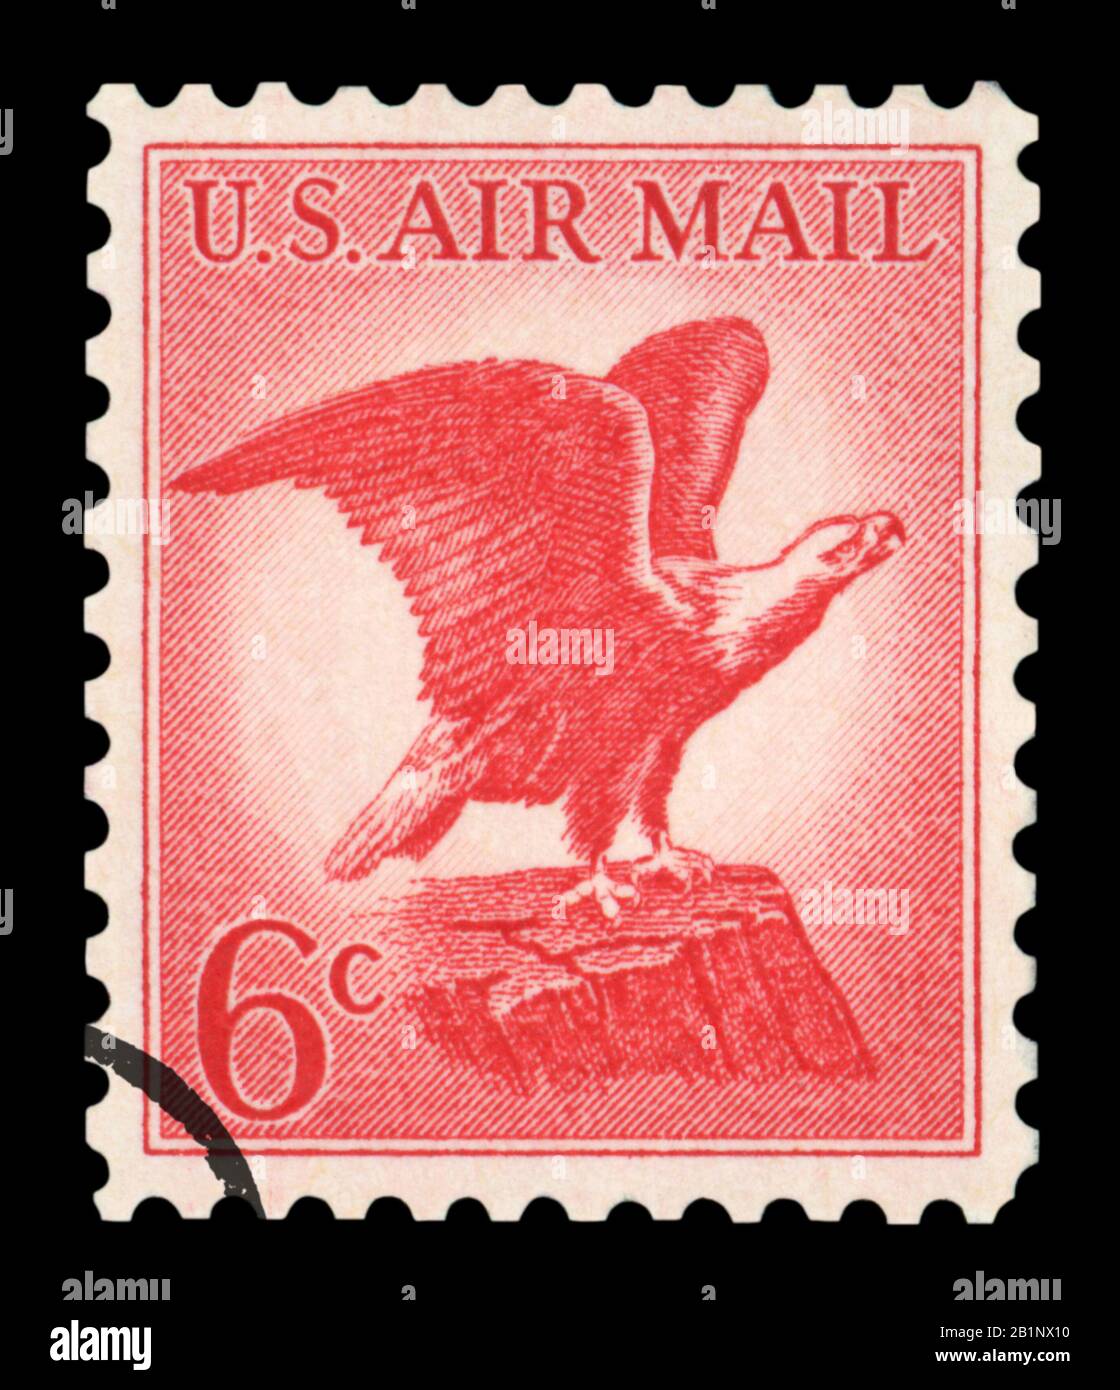 UNITED STATES OF AMERICA - CIRCA 1963: A used US Air Mail postage stamp, with an illustration of the iconic Bald Eagle, circa 1963. Stock Photo